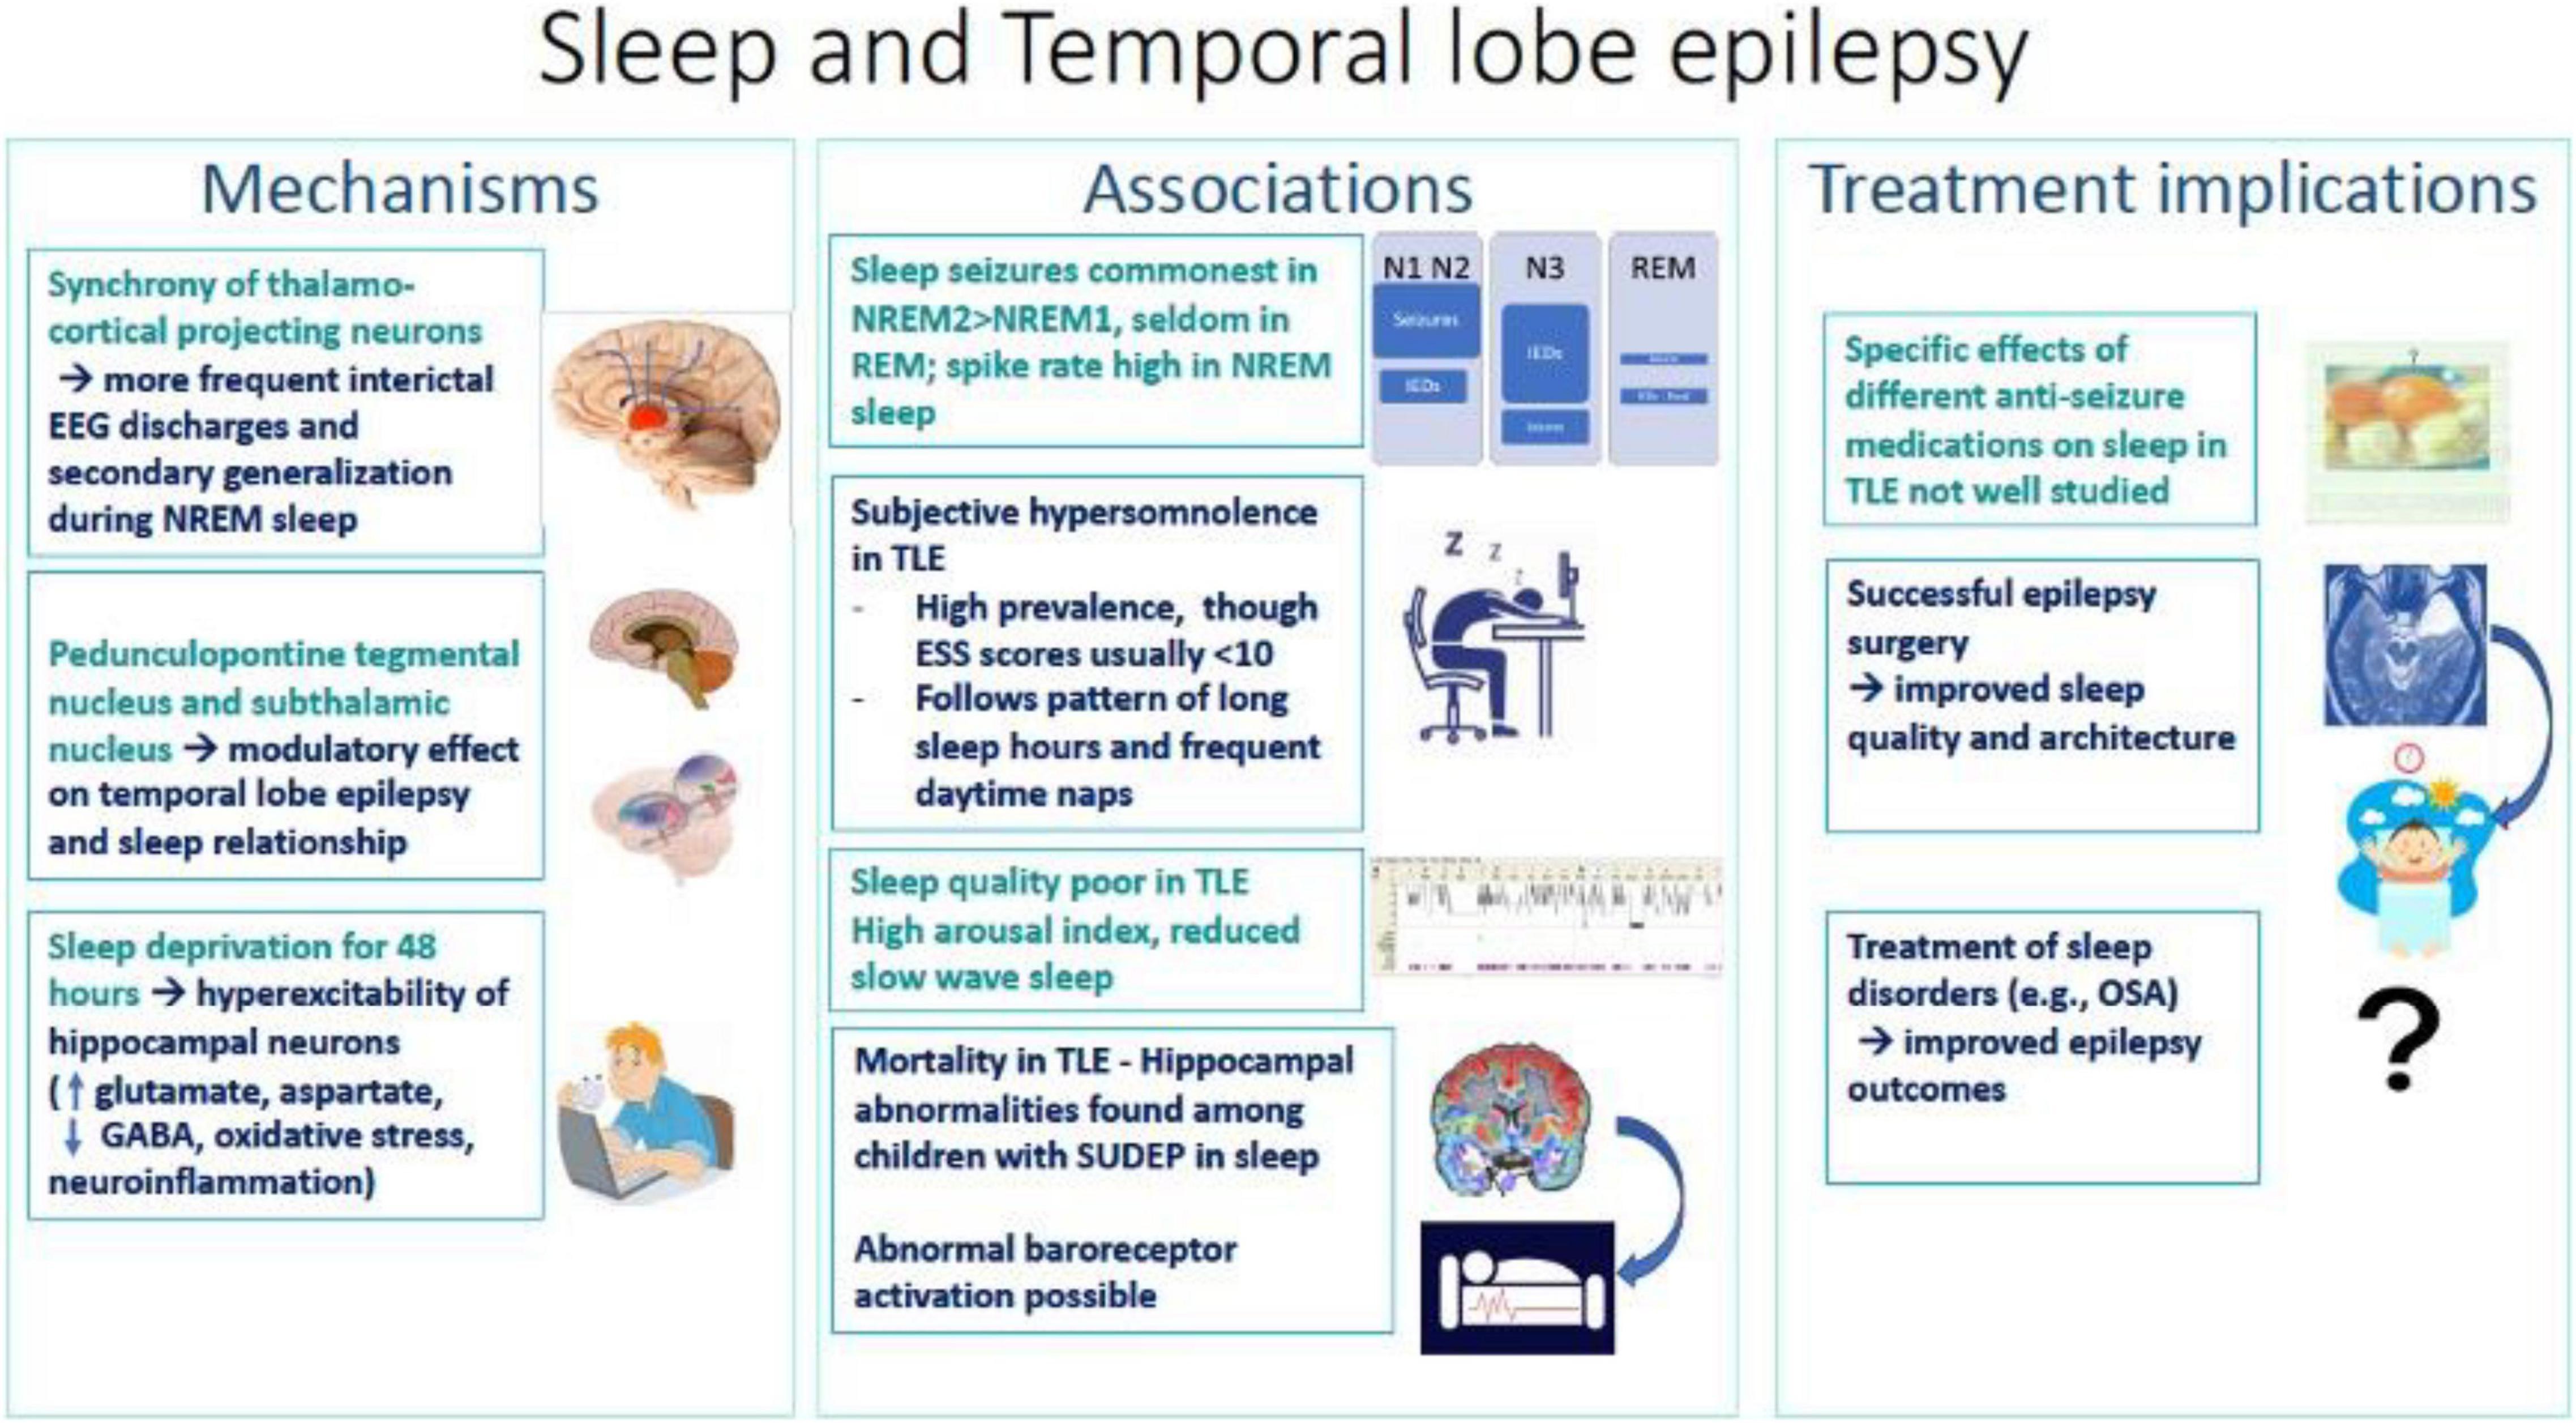 frontiers-sleep-and-temporal-lobe-epilepsy-associations-mechanisms